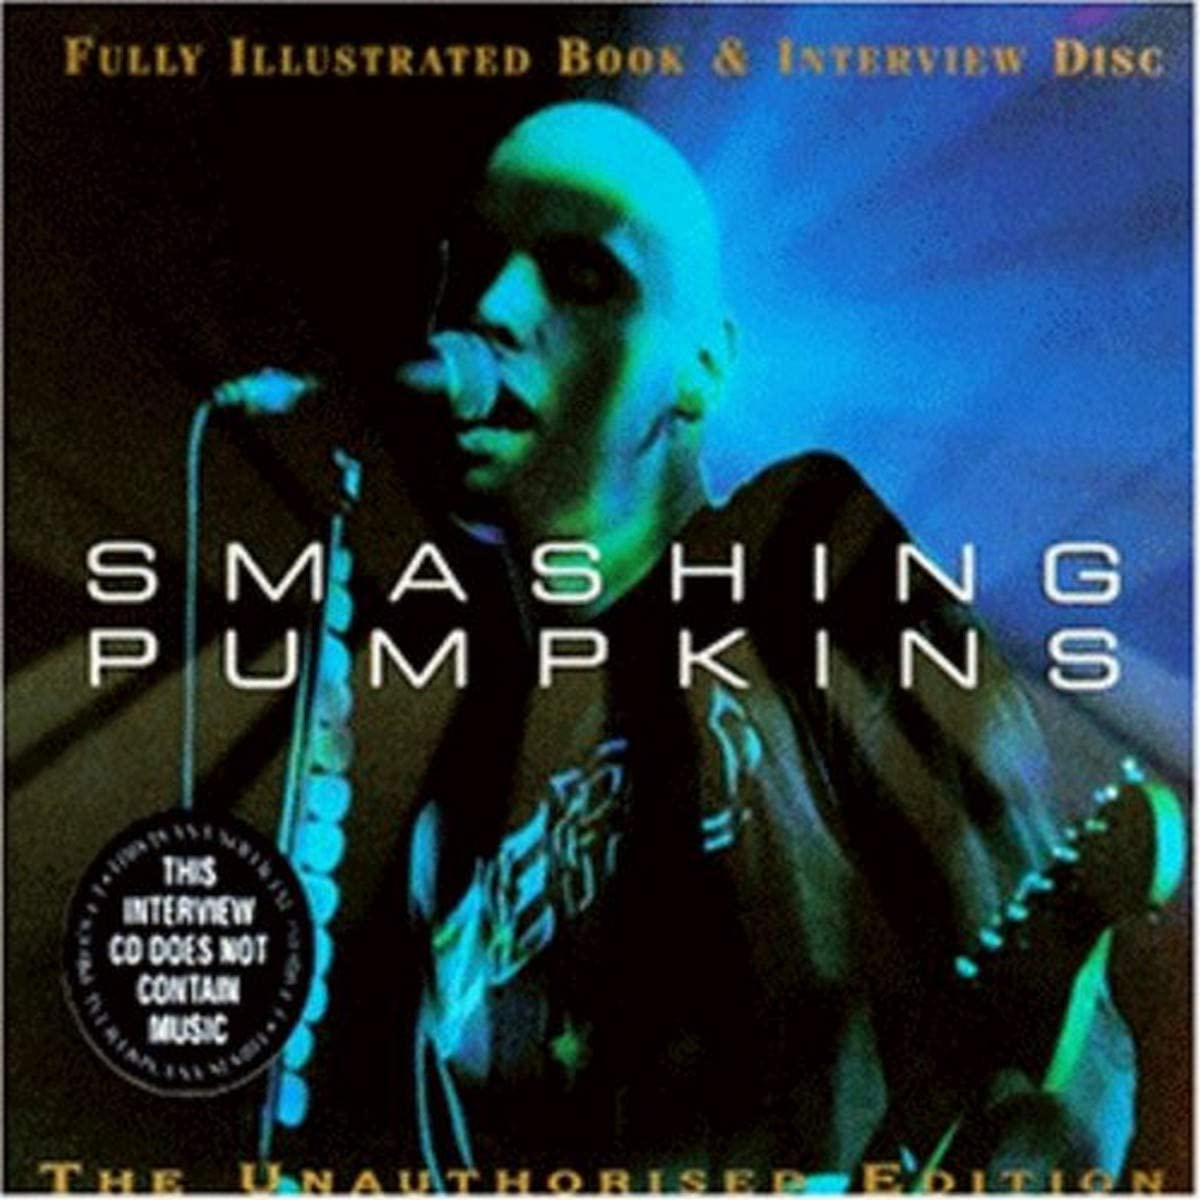 Full Illustrated Book & Interview Disc [Audio CD] Smashing Pumpkins